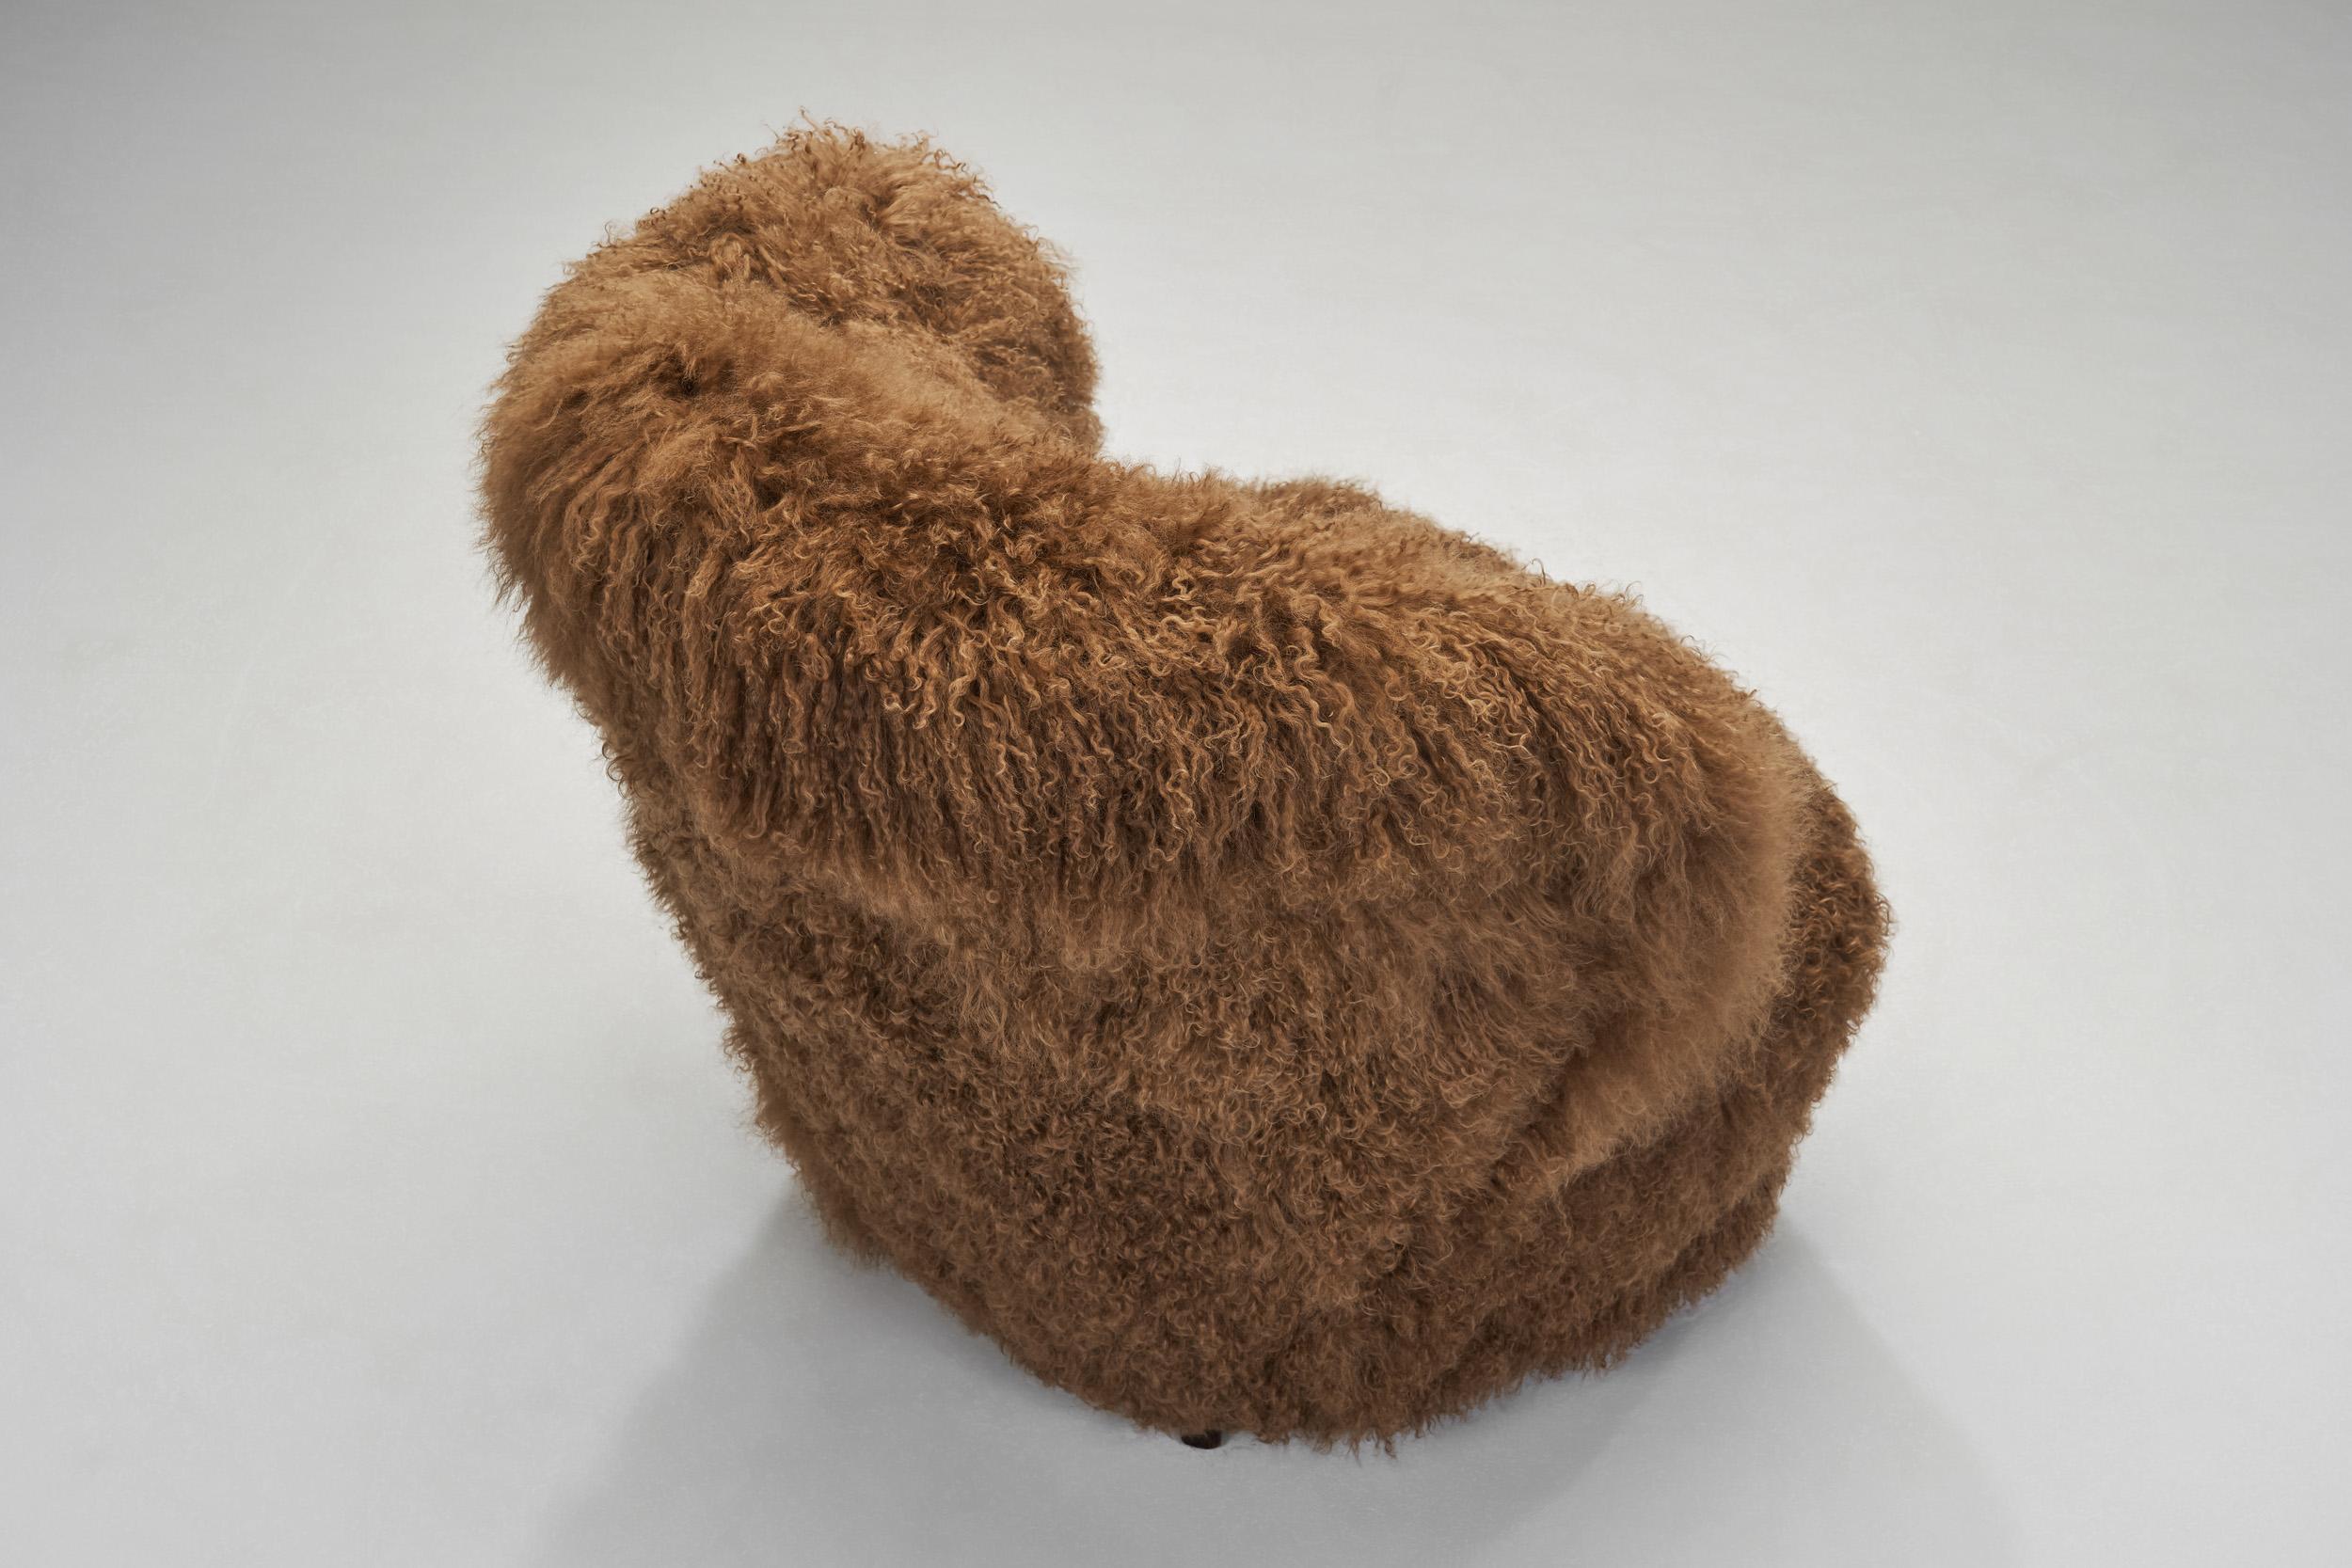 Nordic Modern Lounge Chairs in Longhair Sheepskin, Finland ca 1950s For Sale 3